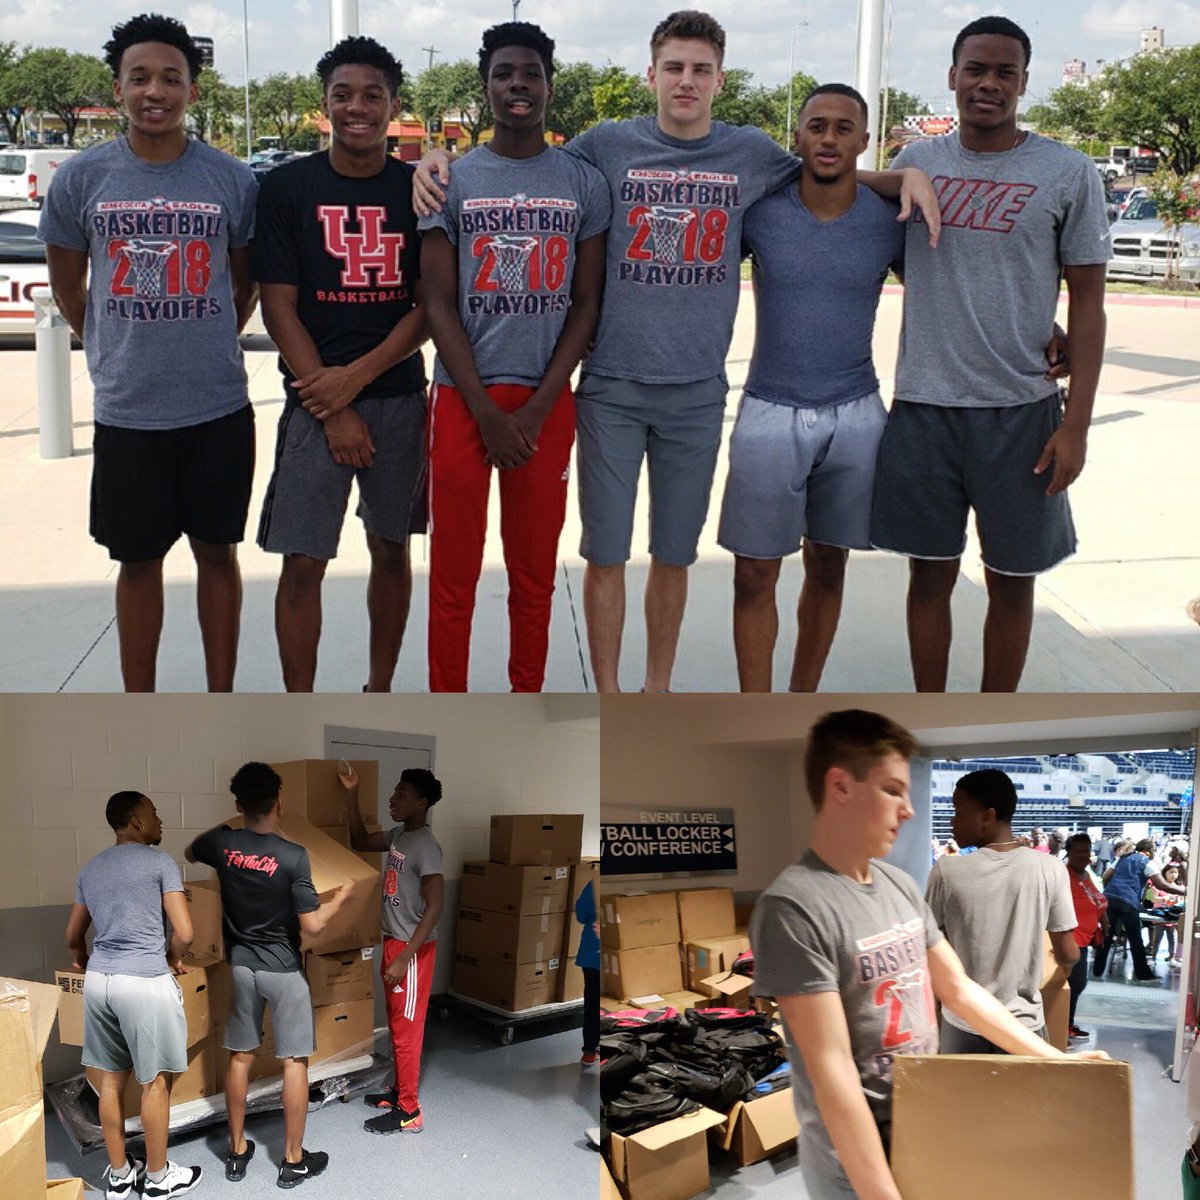 Atascocita 🏀Seniors And Sophs volunteering at the back to school drive. #service #community #team1st